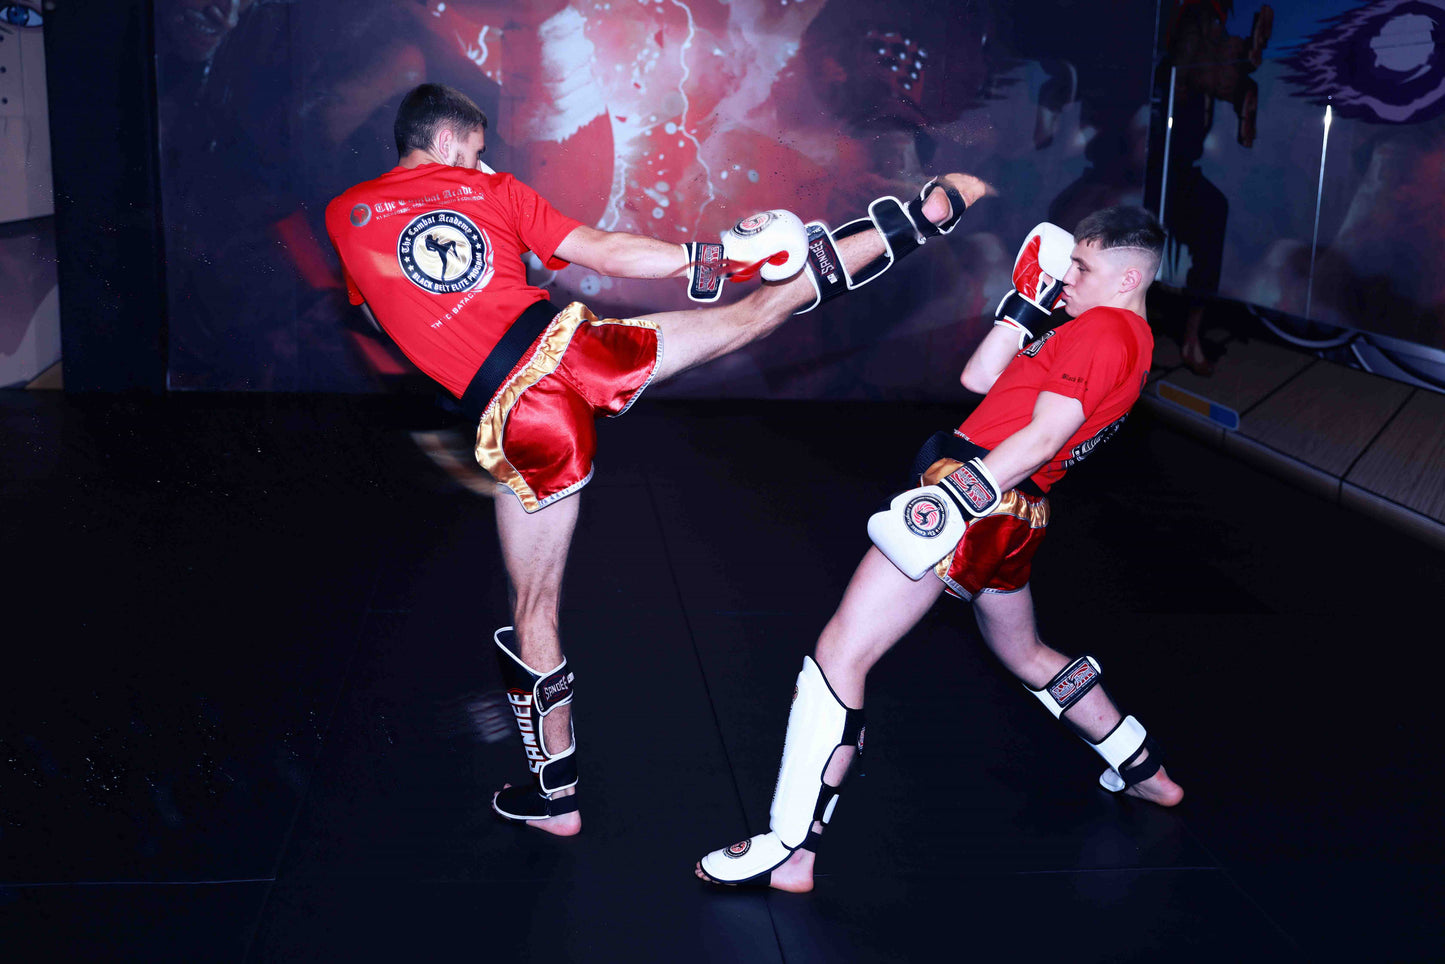 Advanced Kickboxing Drills - How to Fight at Elite Level with Mick Crossland